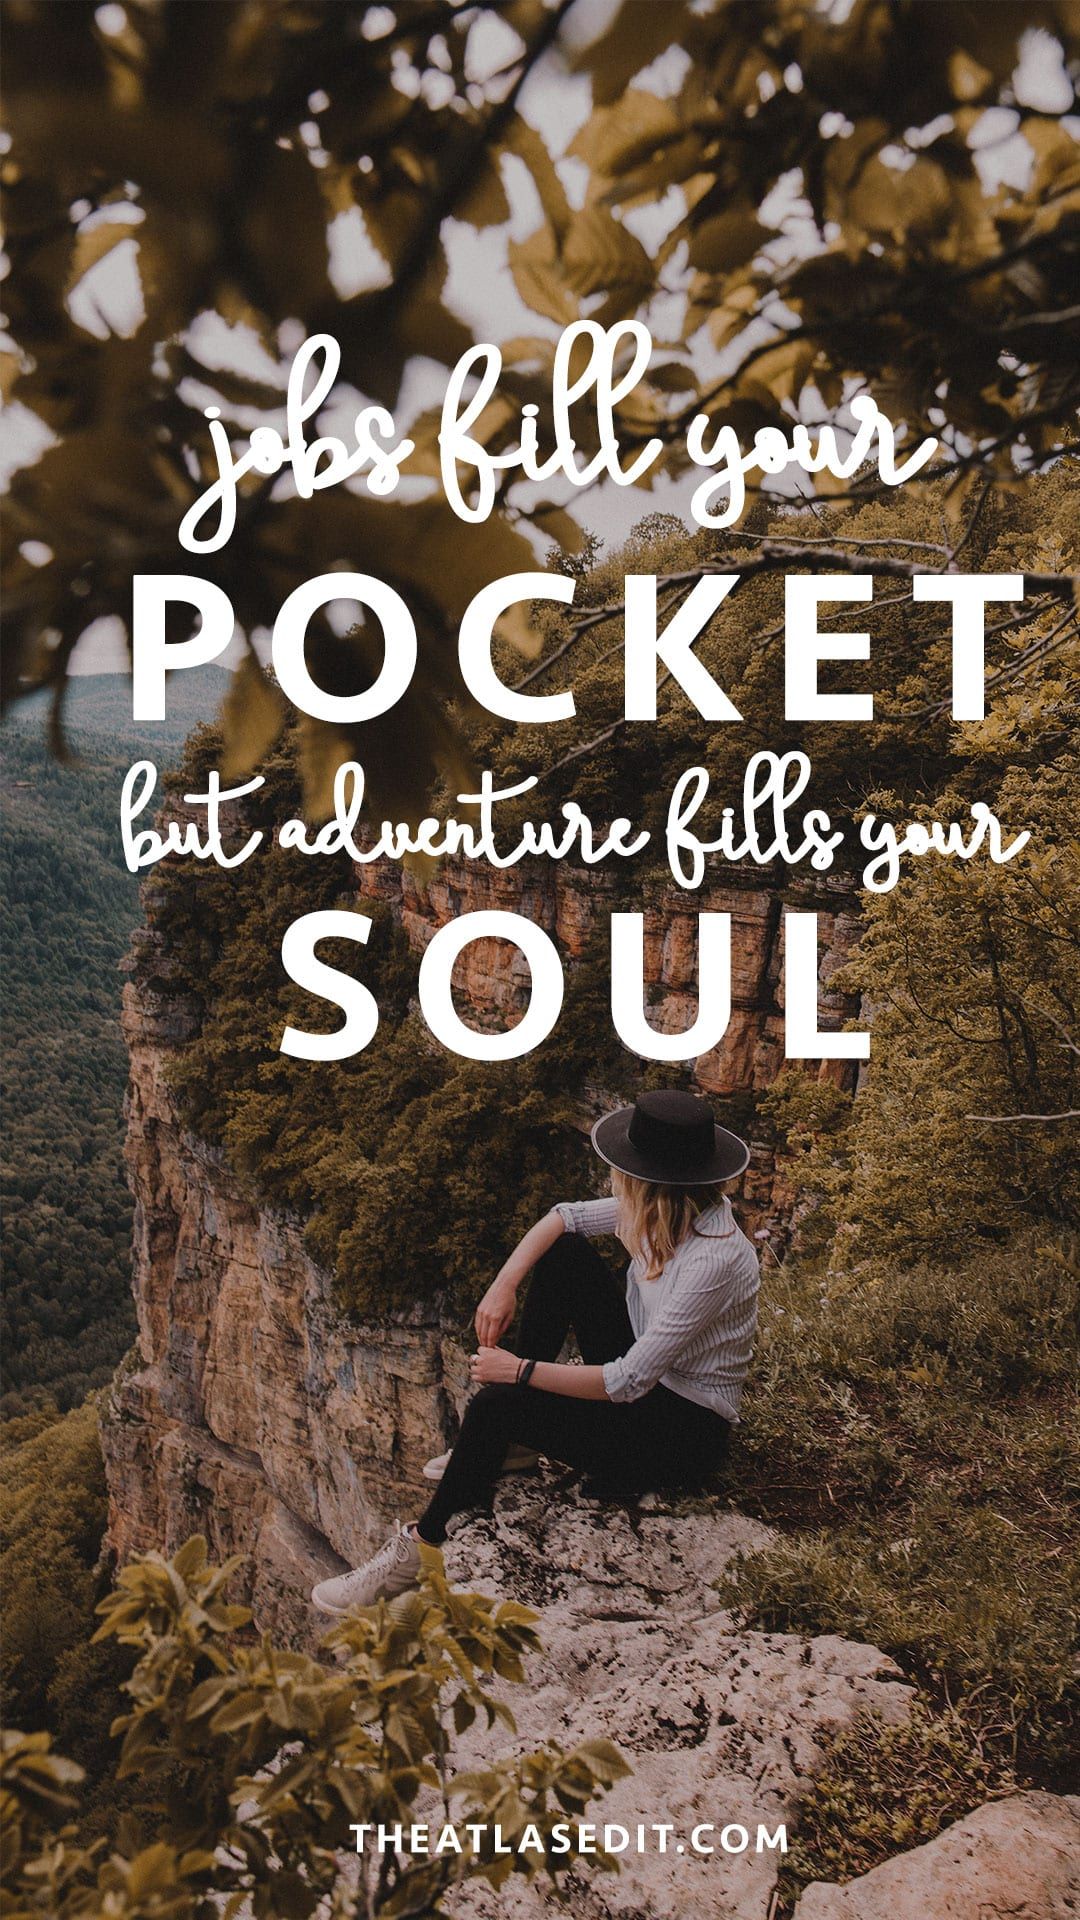 Travel Quotes to Spark Your Wanderlust (+ Free Wallpaper for your phone!) • The Atlas Edit. Travel quotes, Travel, Travel quotes inspirational